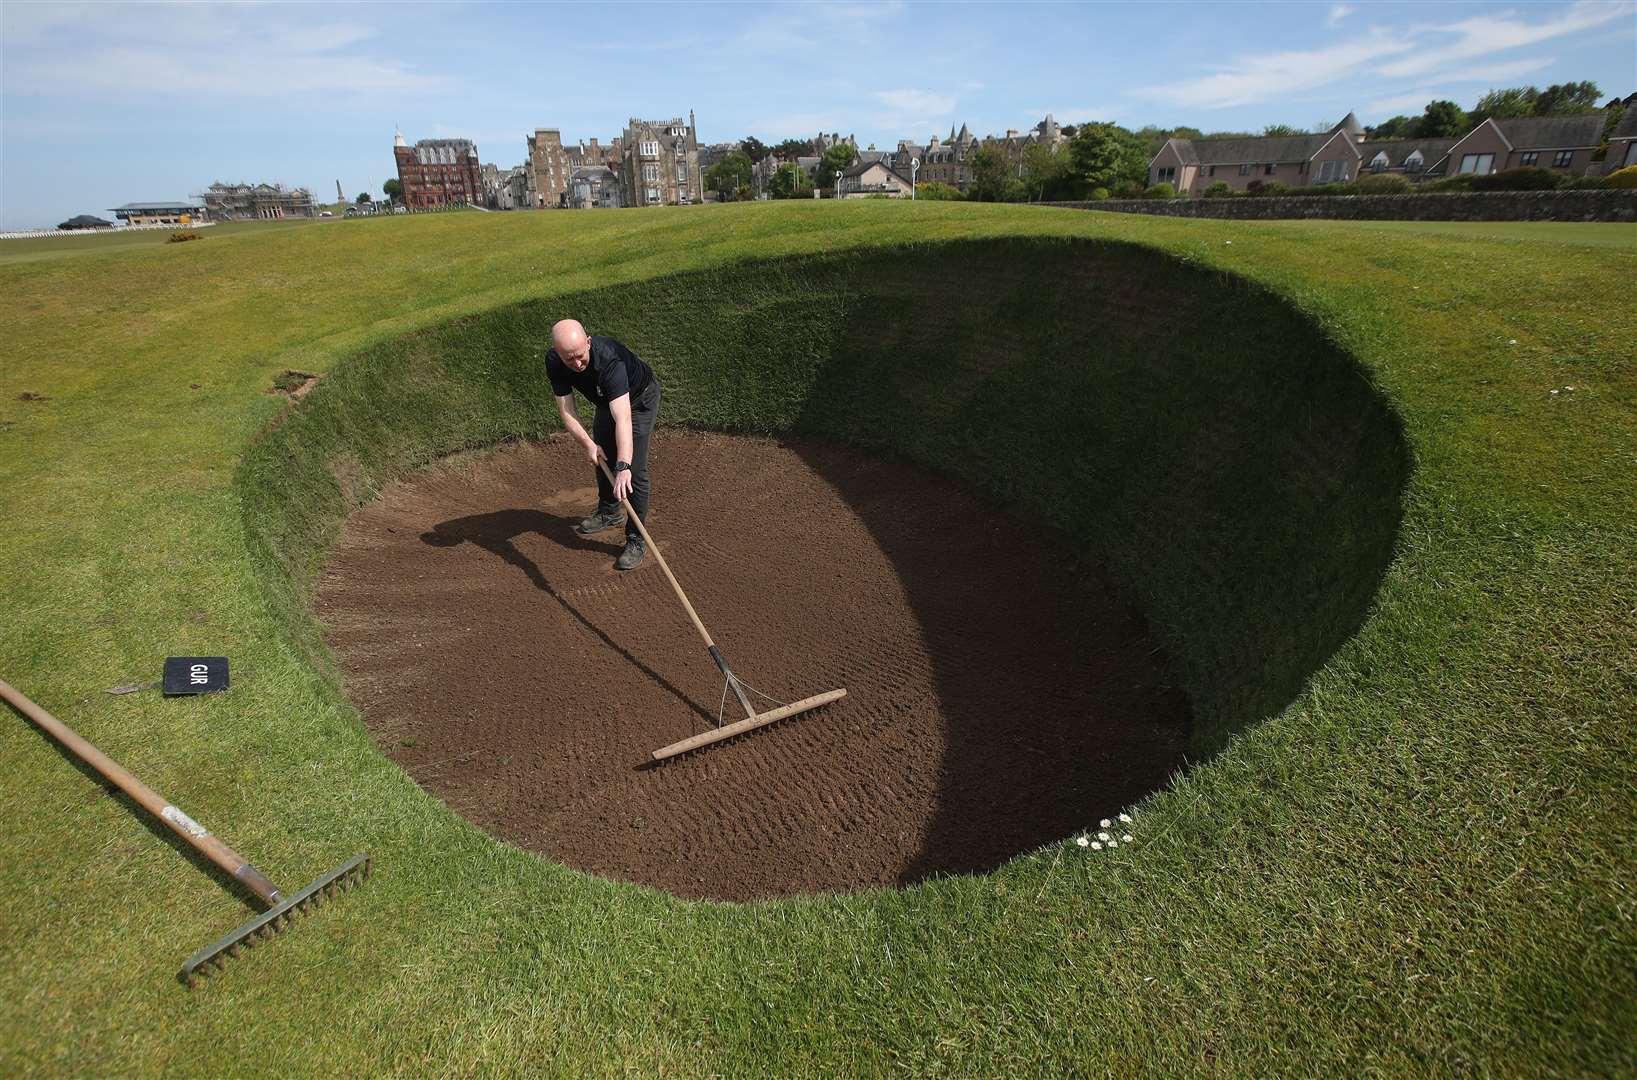 Golf courses could be permitted to reopen in the first phase of lockdown restrictions being eased (Andrew Milligan/PA)